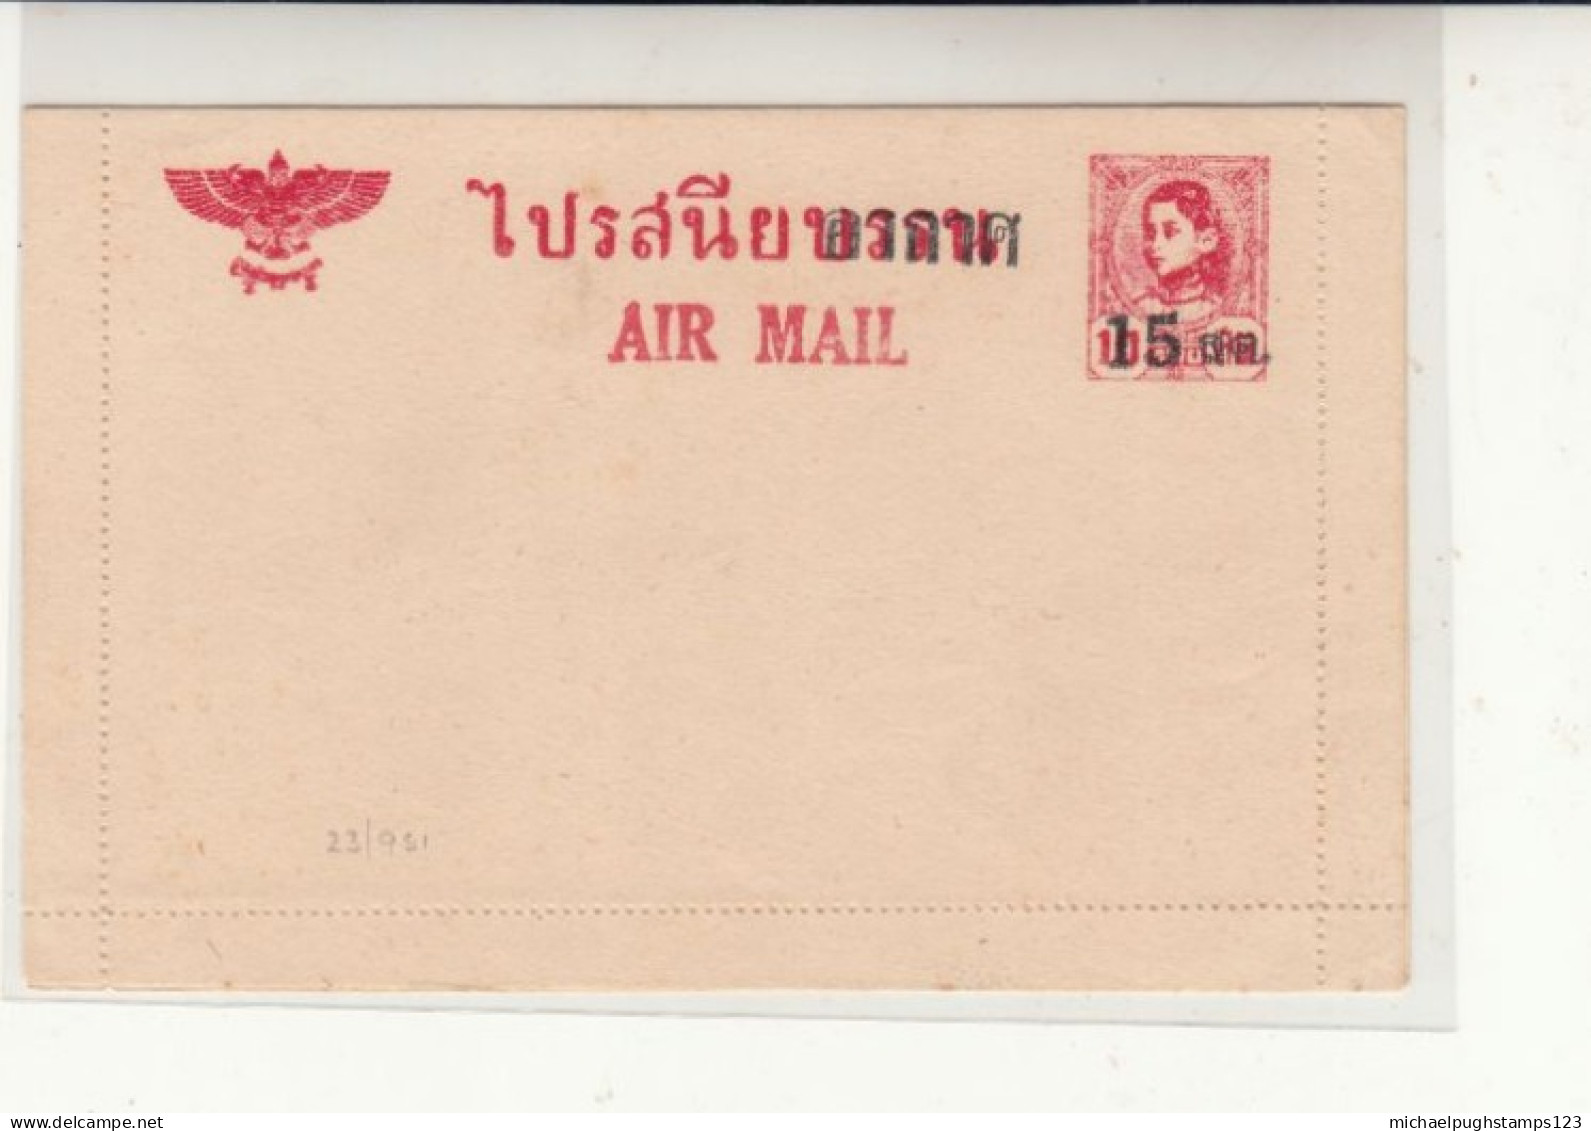 Thailand / Airmail Stationery / Rama 8 / Letter Cards - Thailand